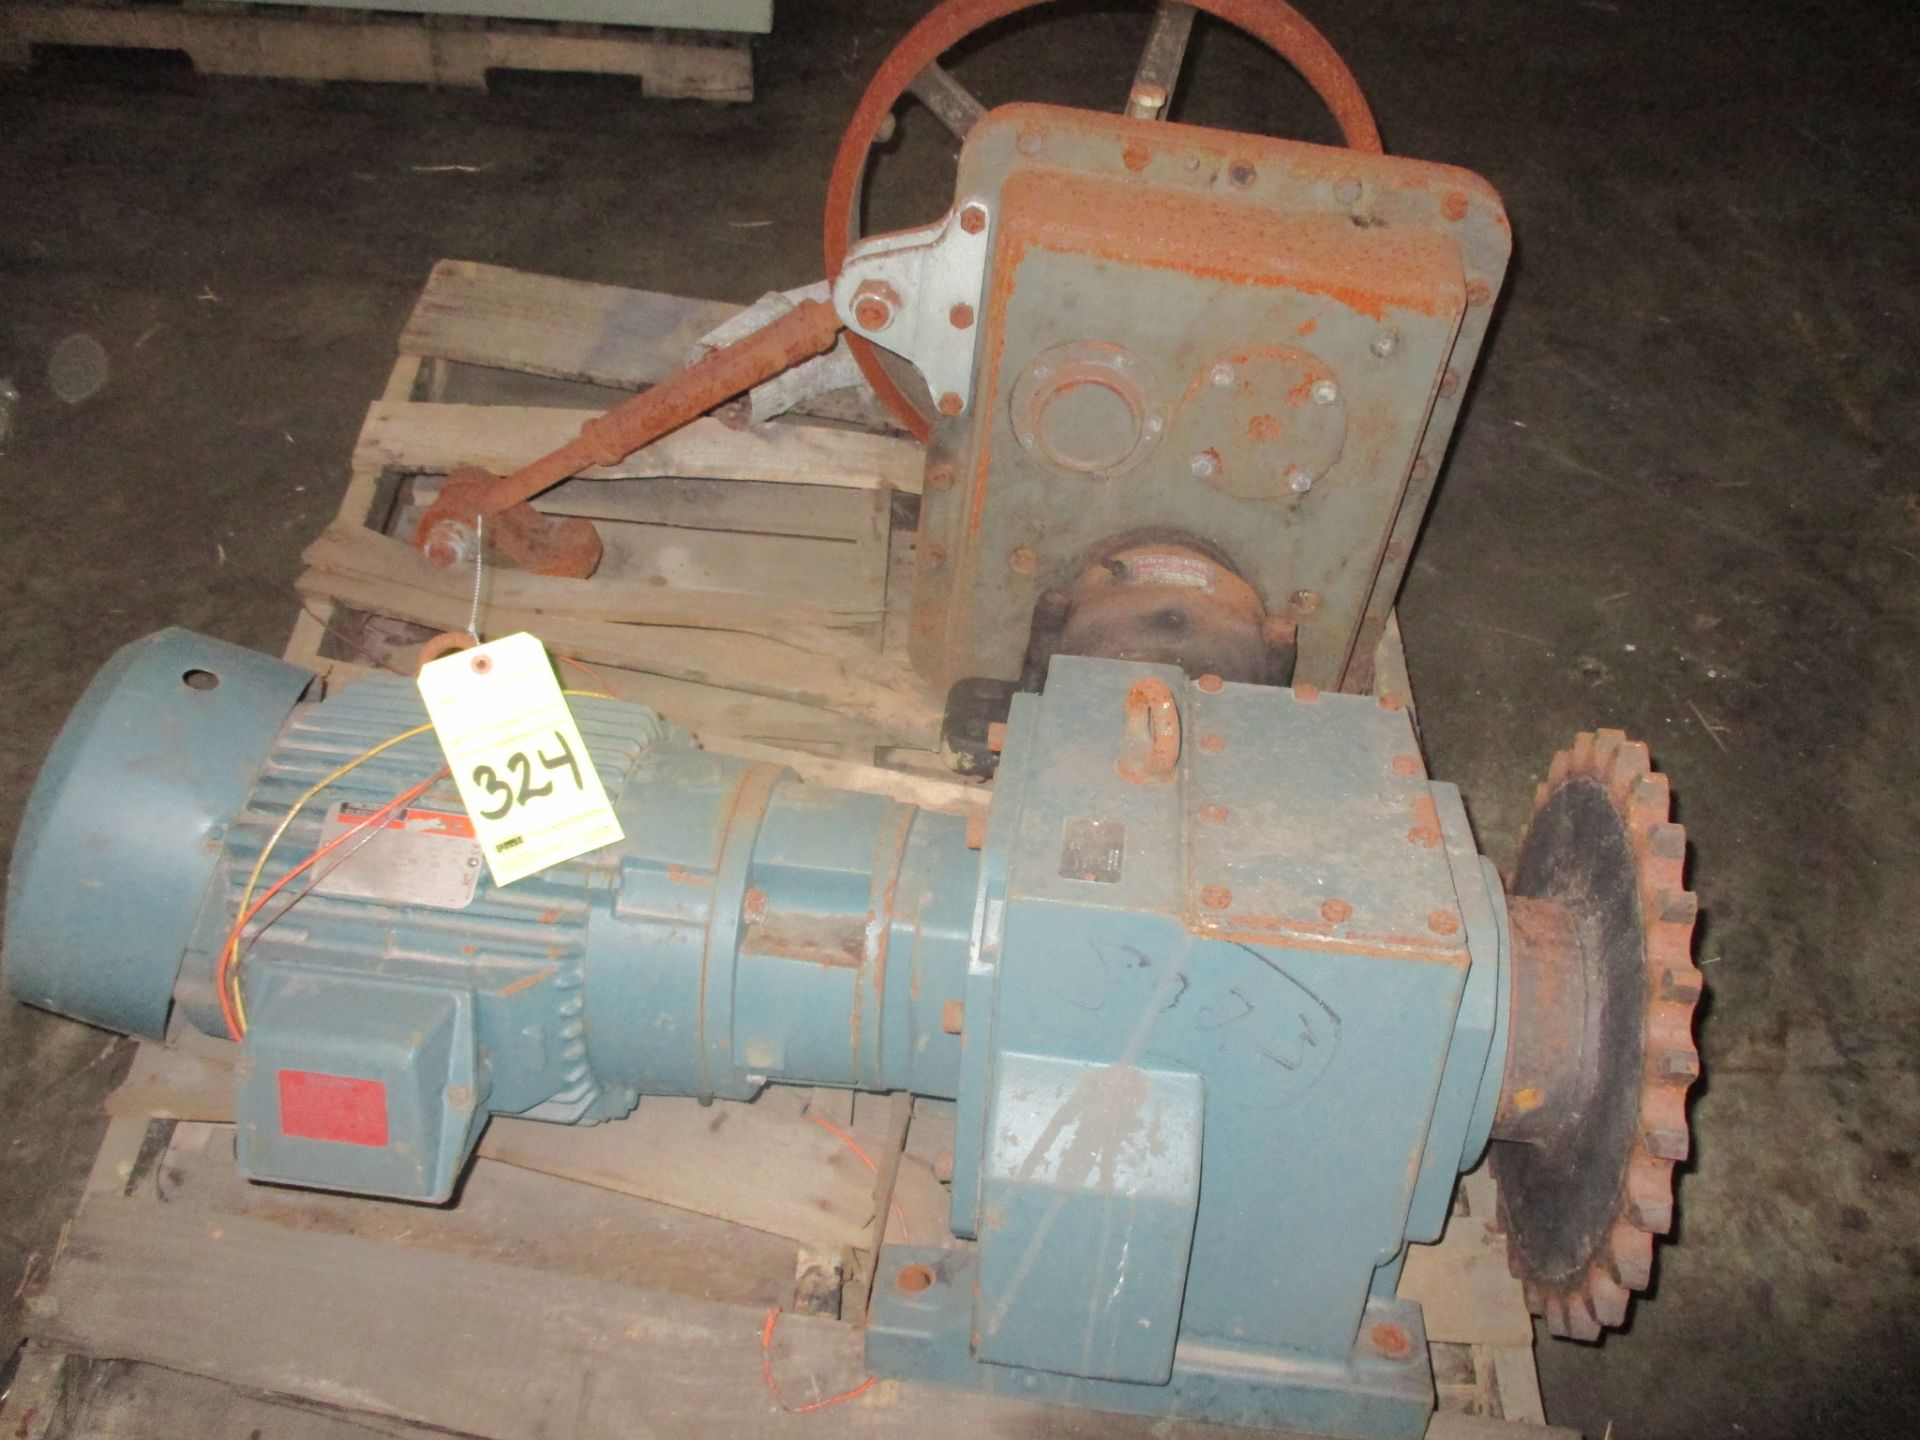 LOT CONSISTING OF: (1) motor & (2) gear reducers